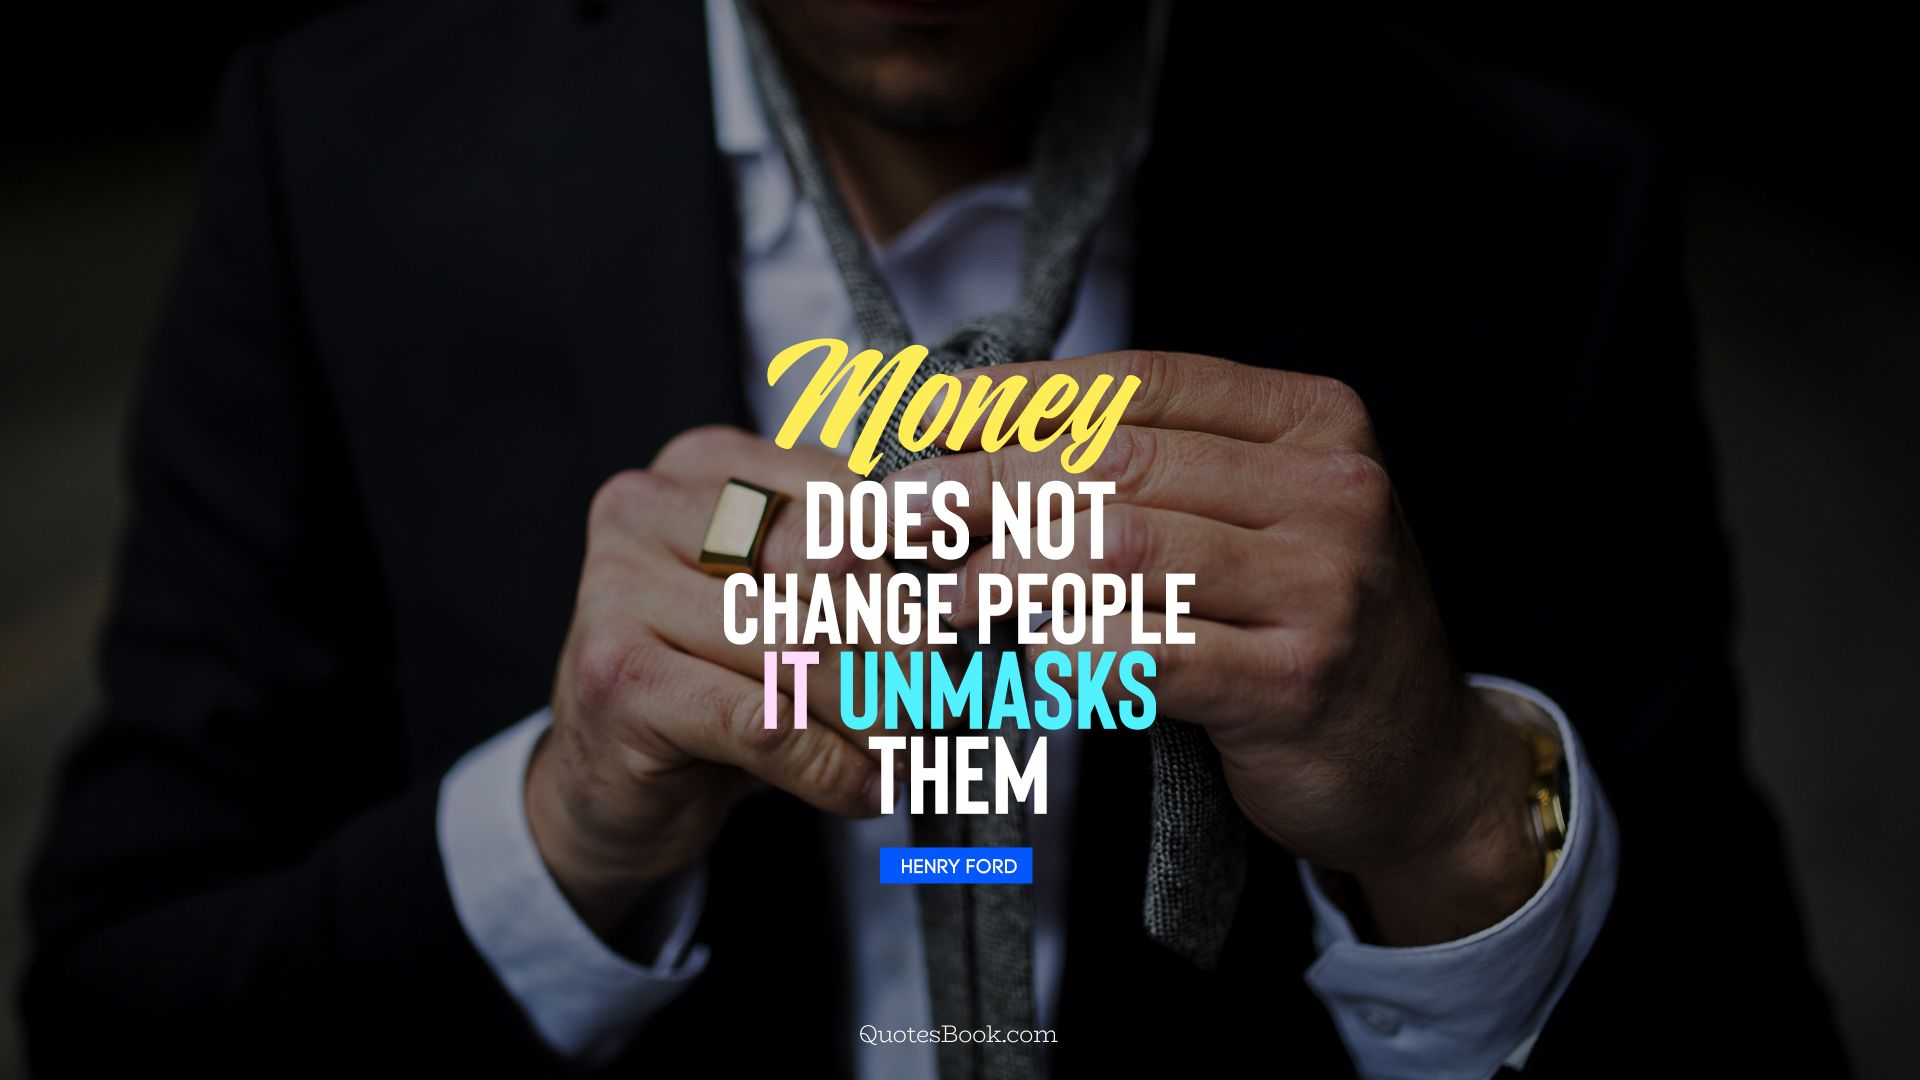 Money does not change people, it unmasks them QuotesBook